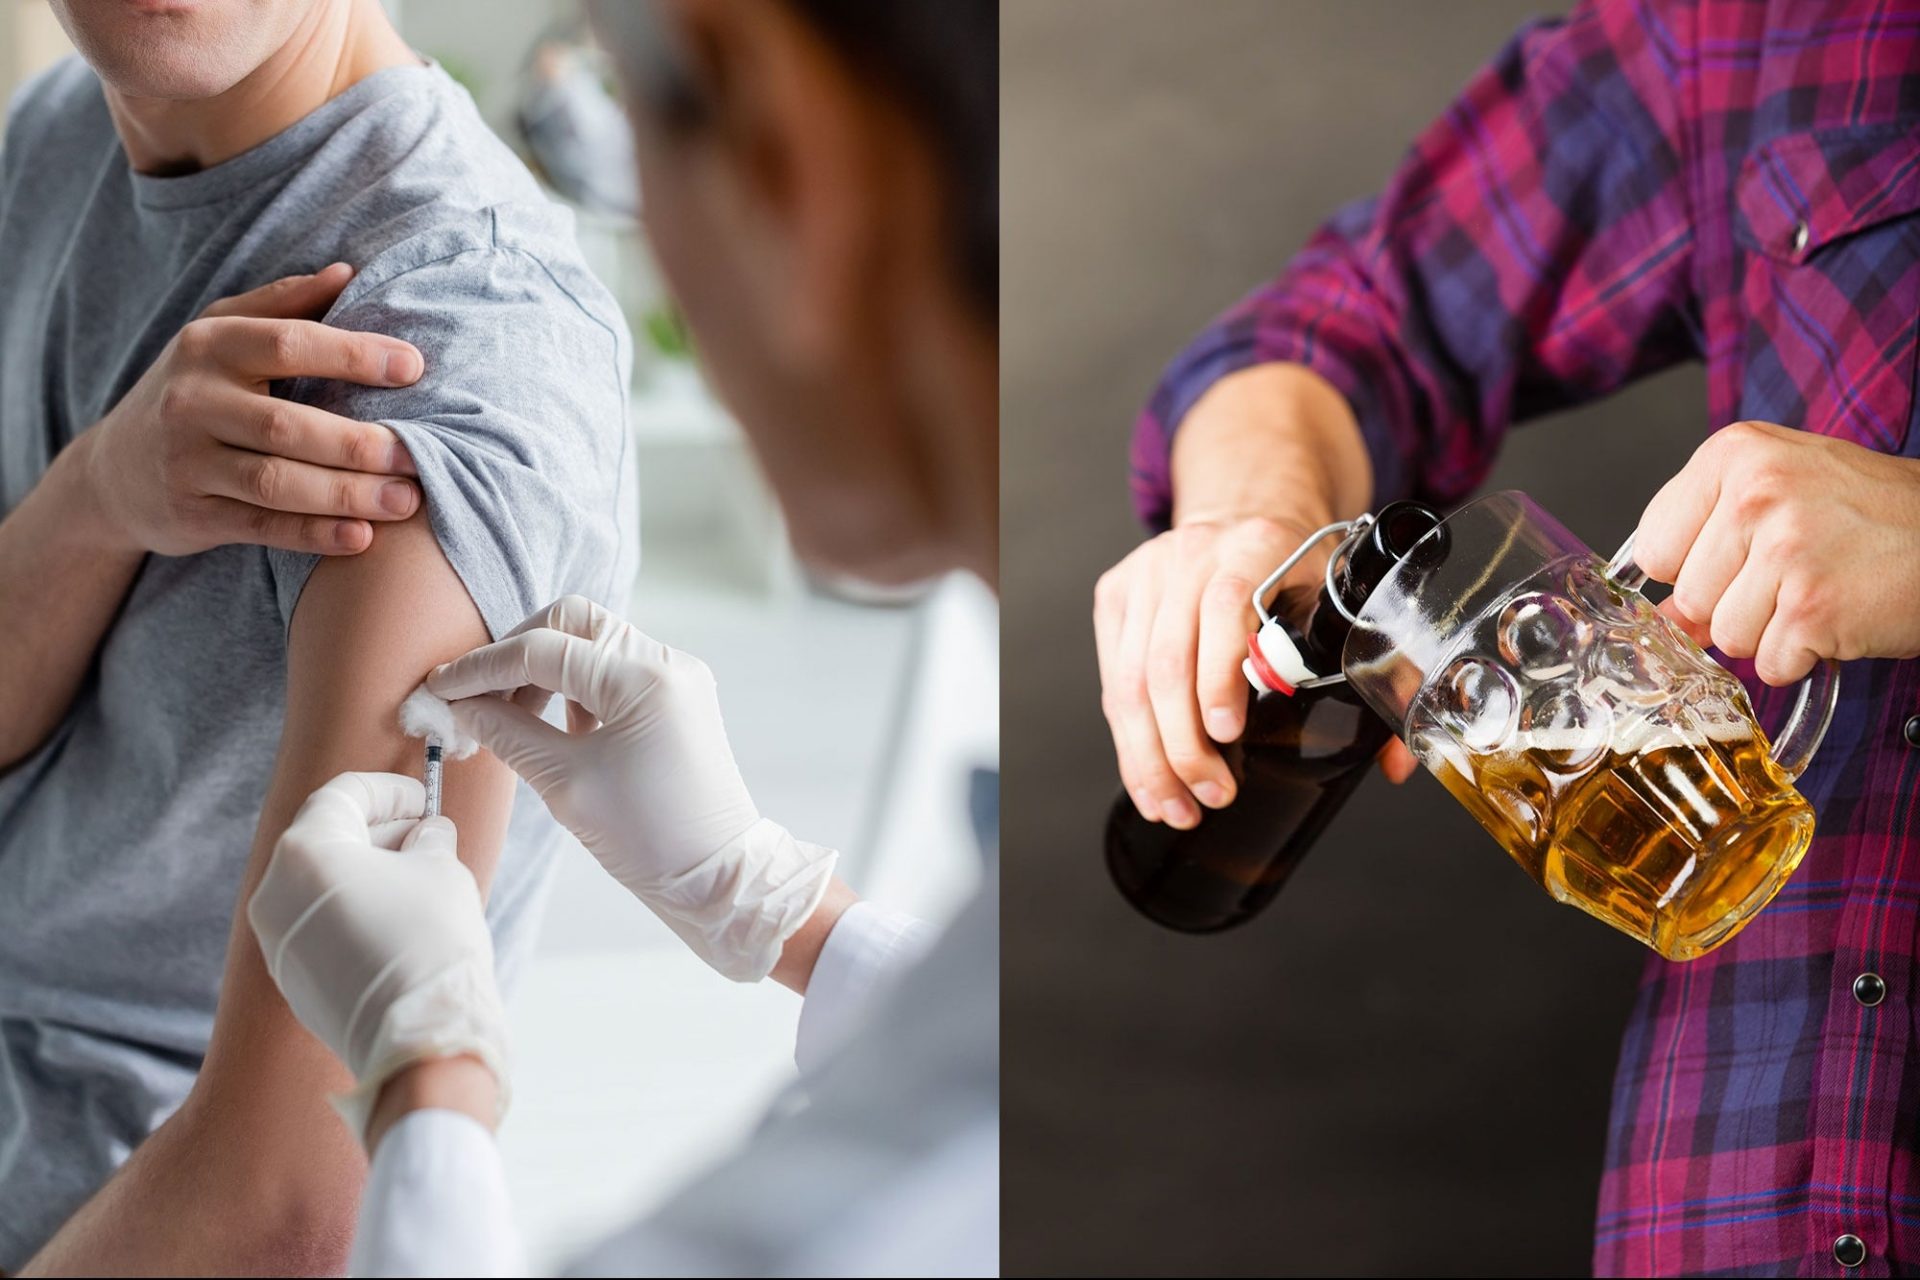 Can I drink alcohol after getting vaccinated in opposition to COVID-19?